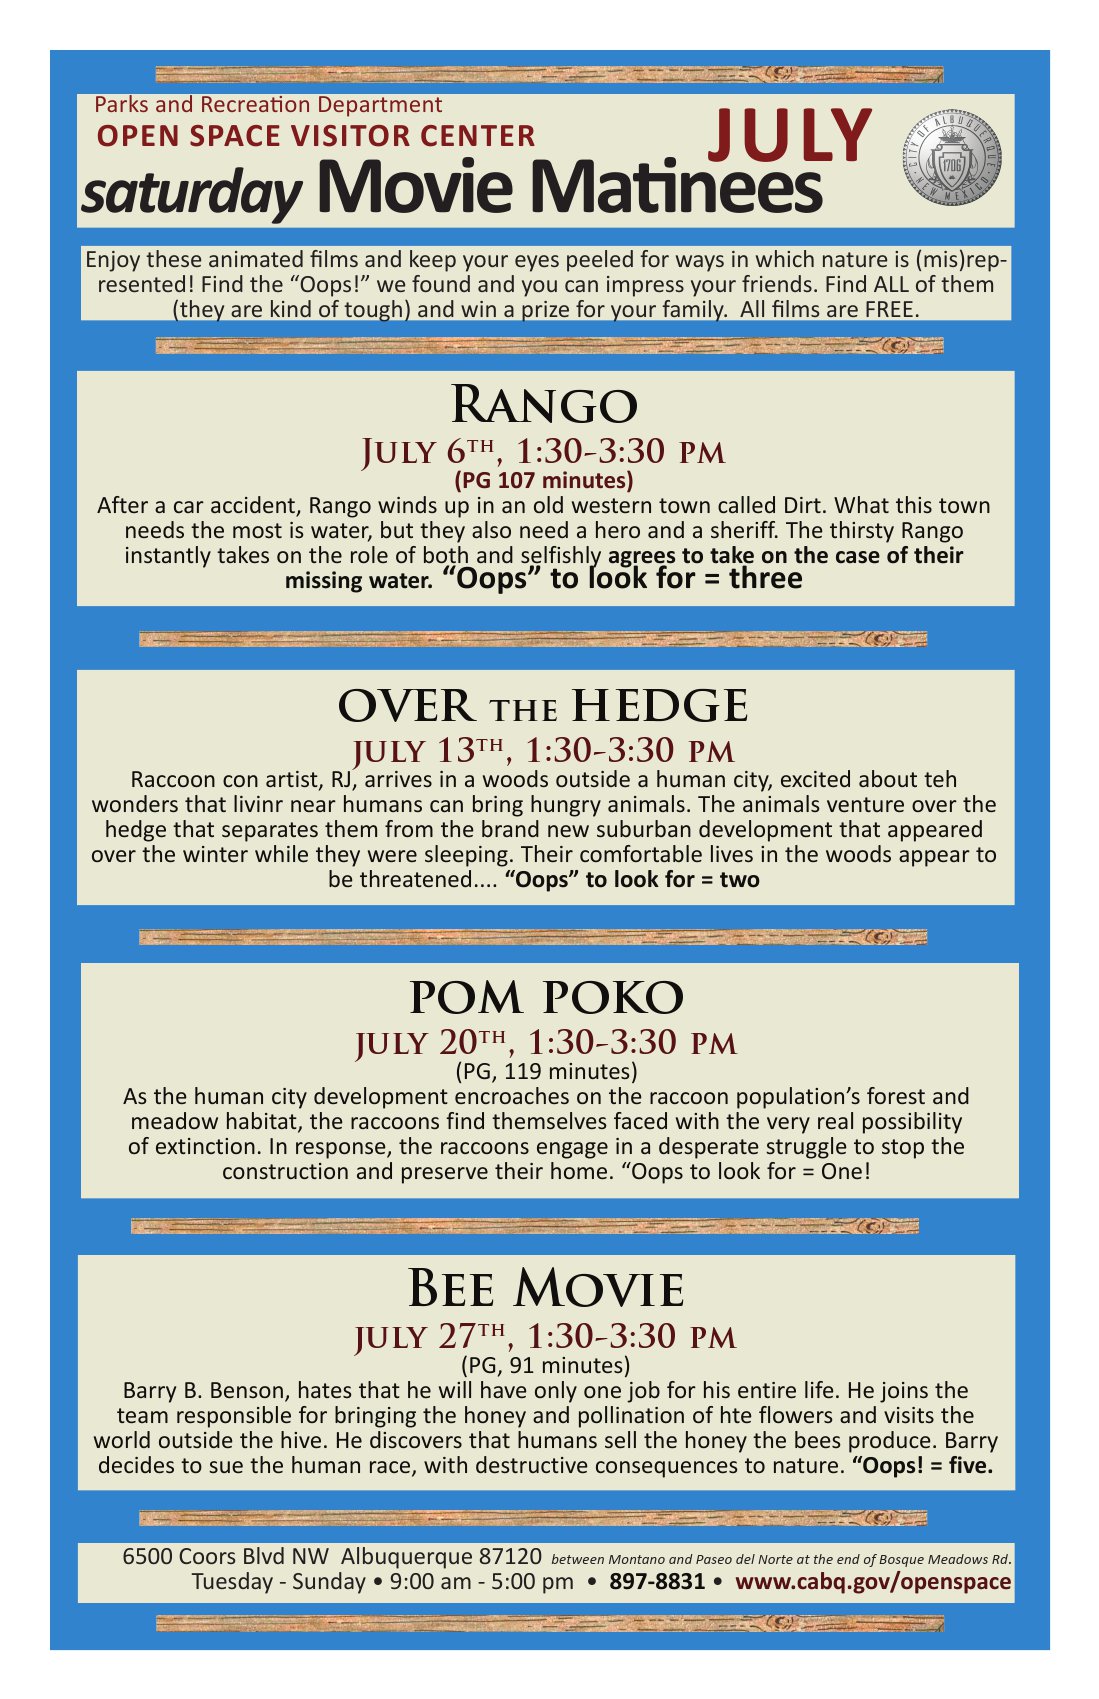 Movie Matinees at OSVC July 2013